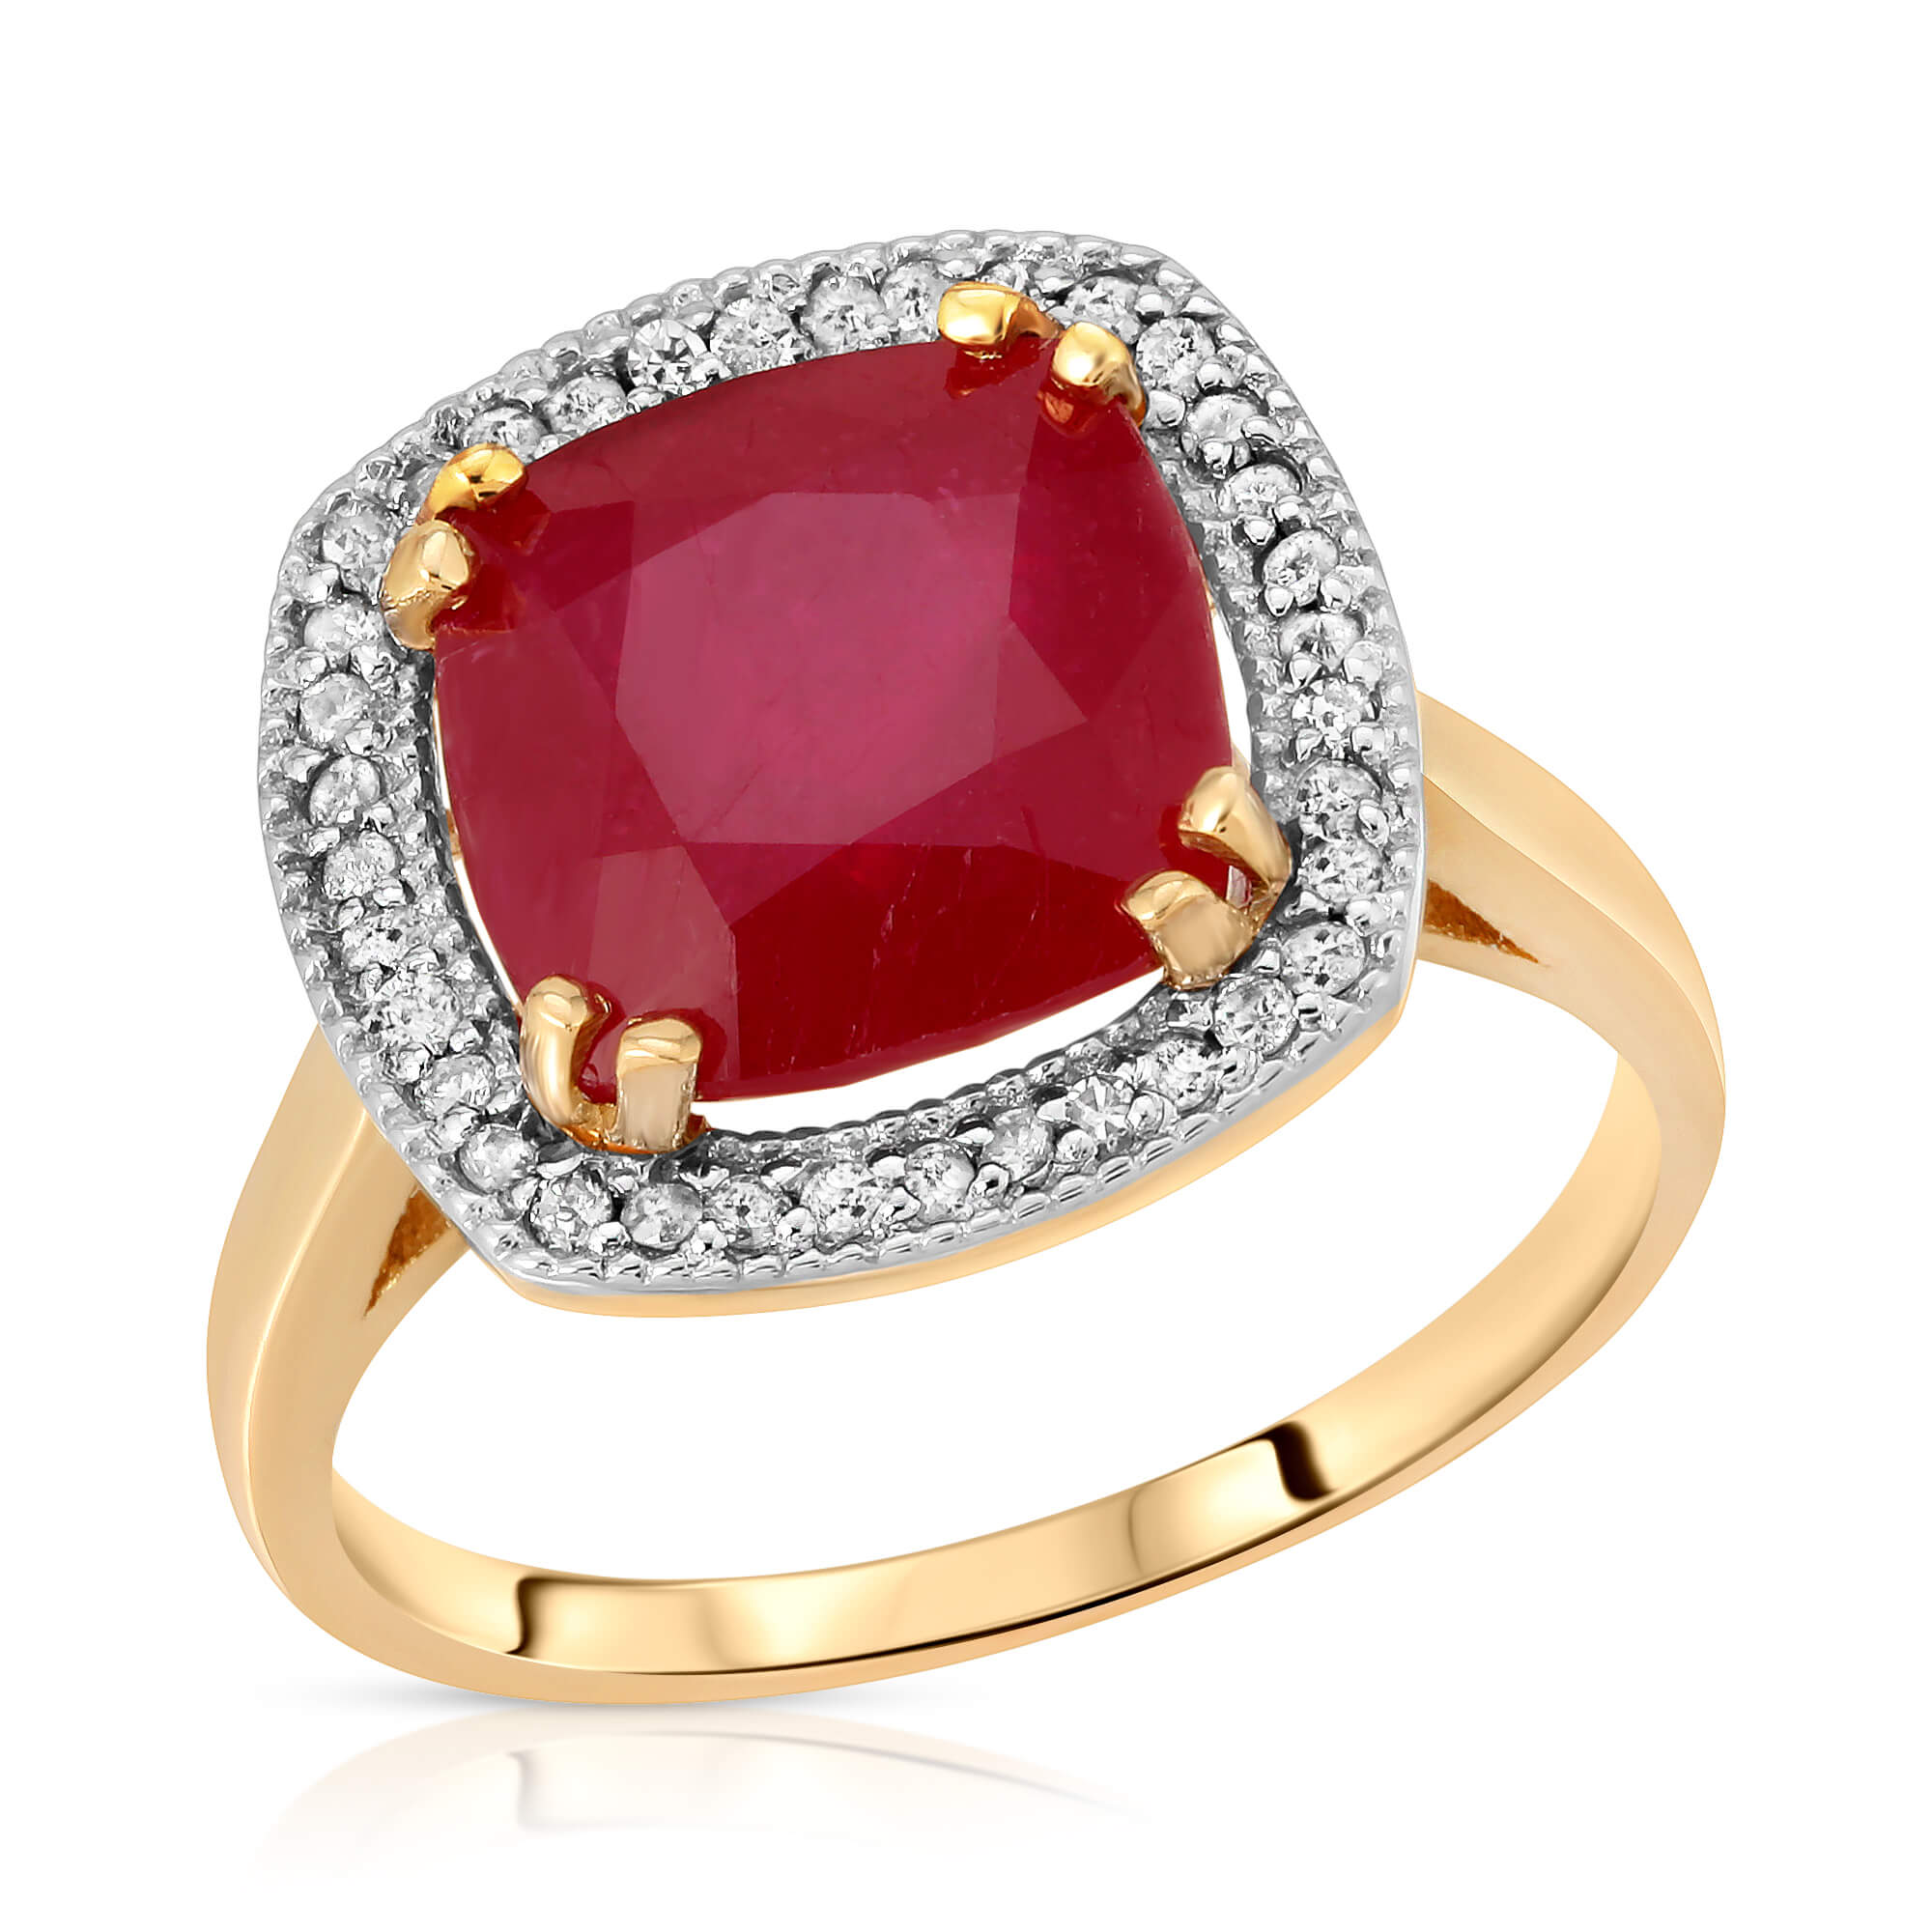 Cushion Cut Ruby Ring 6.9 ctw in 18ct Gold